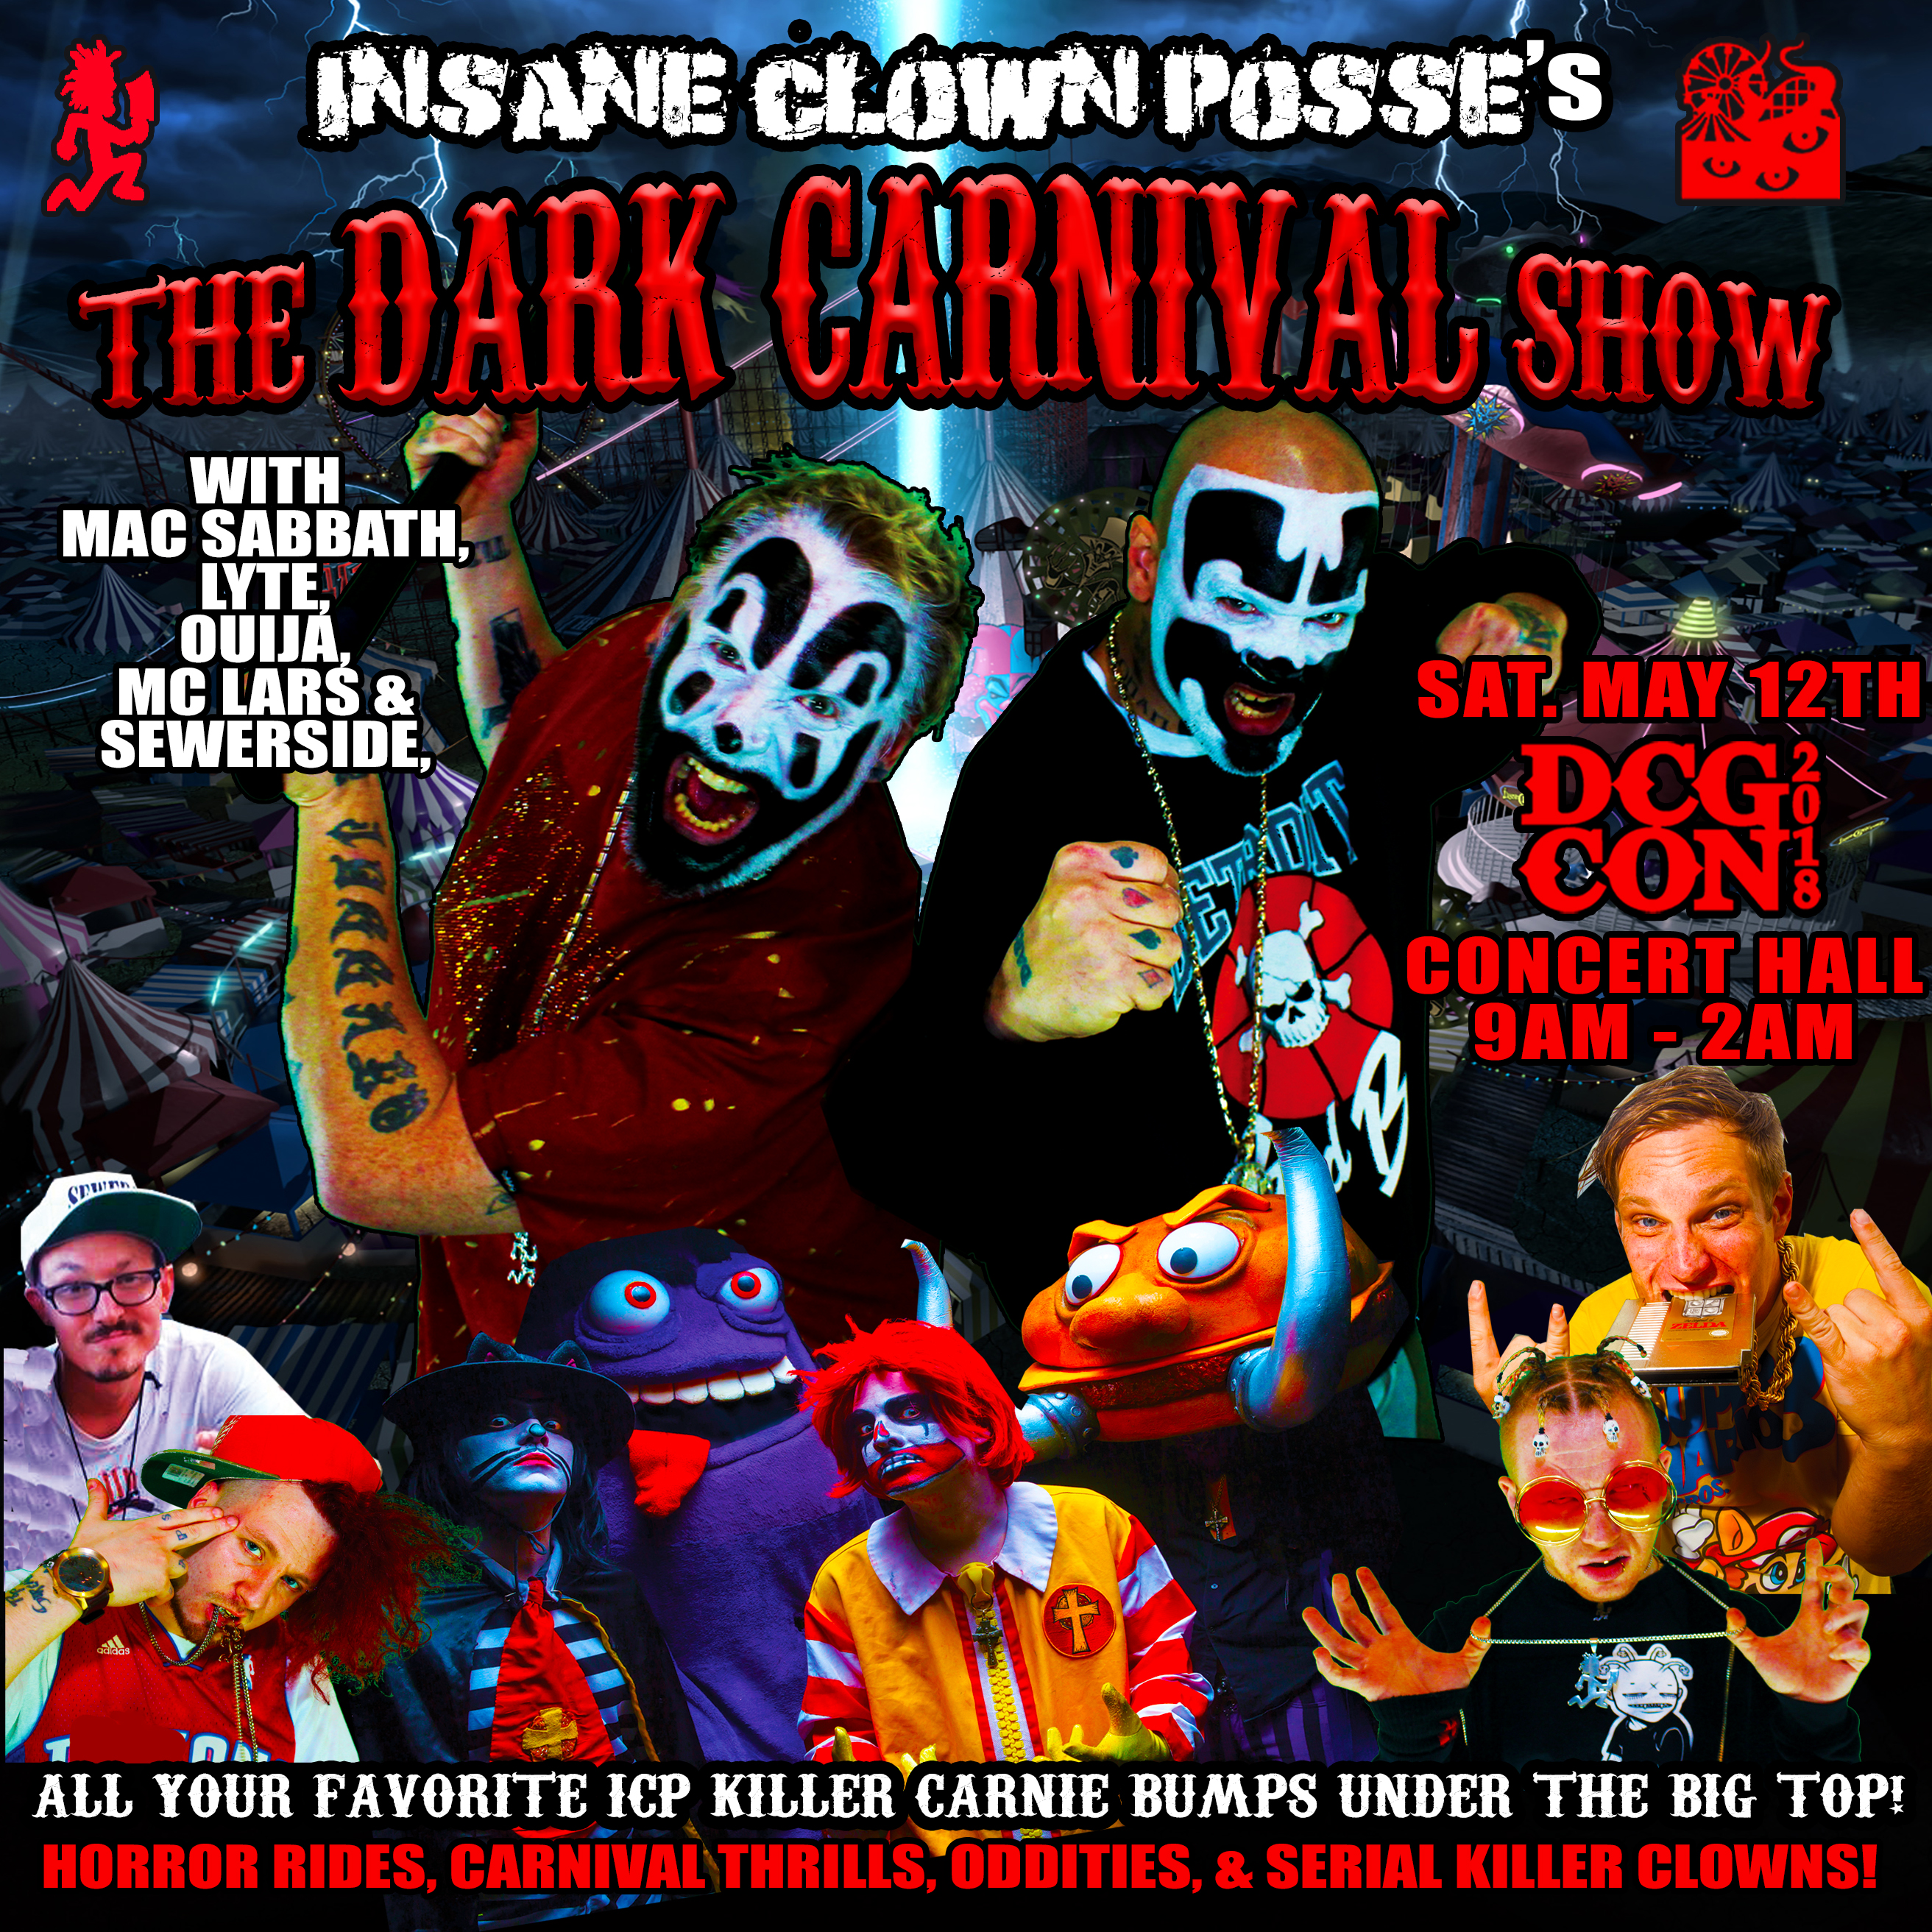 Details for ICP’s Dark Carnival Super Show May 12th in Denver